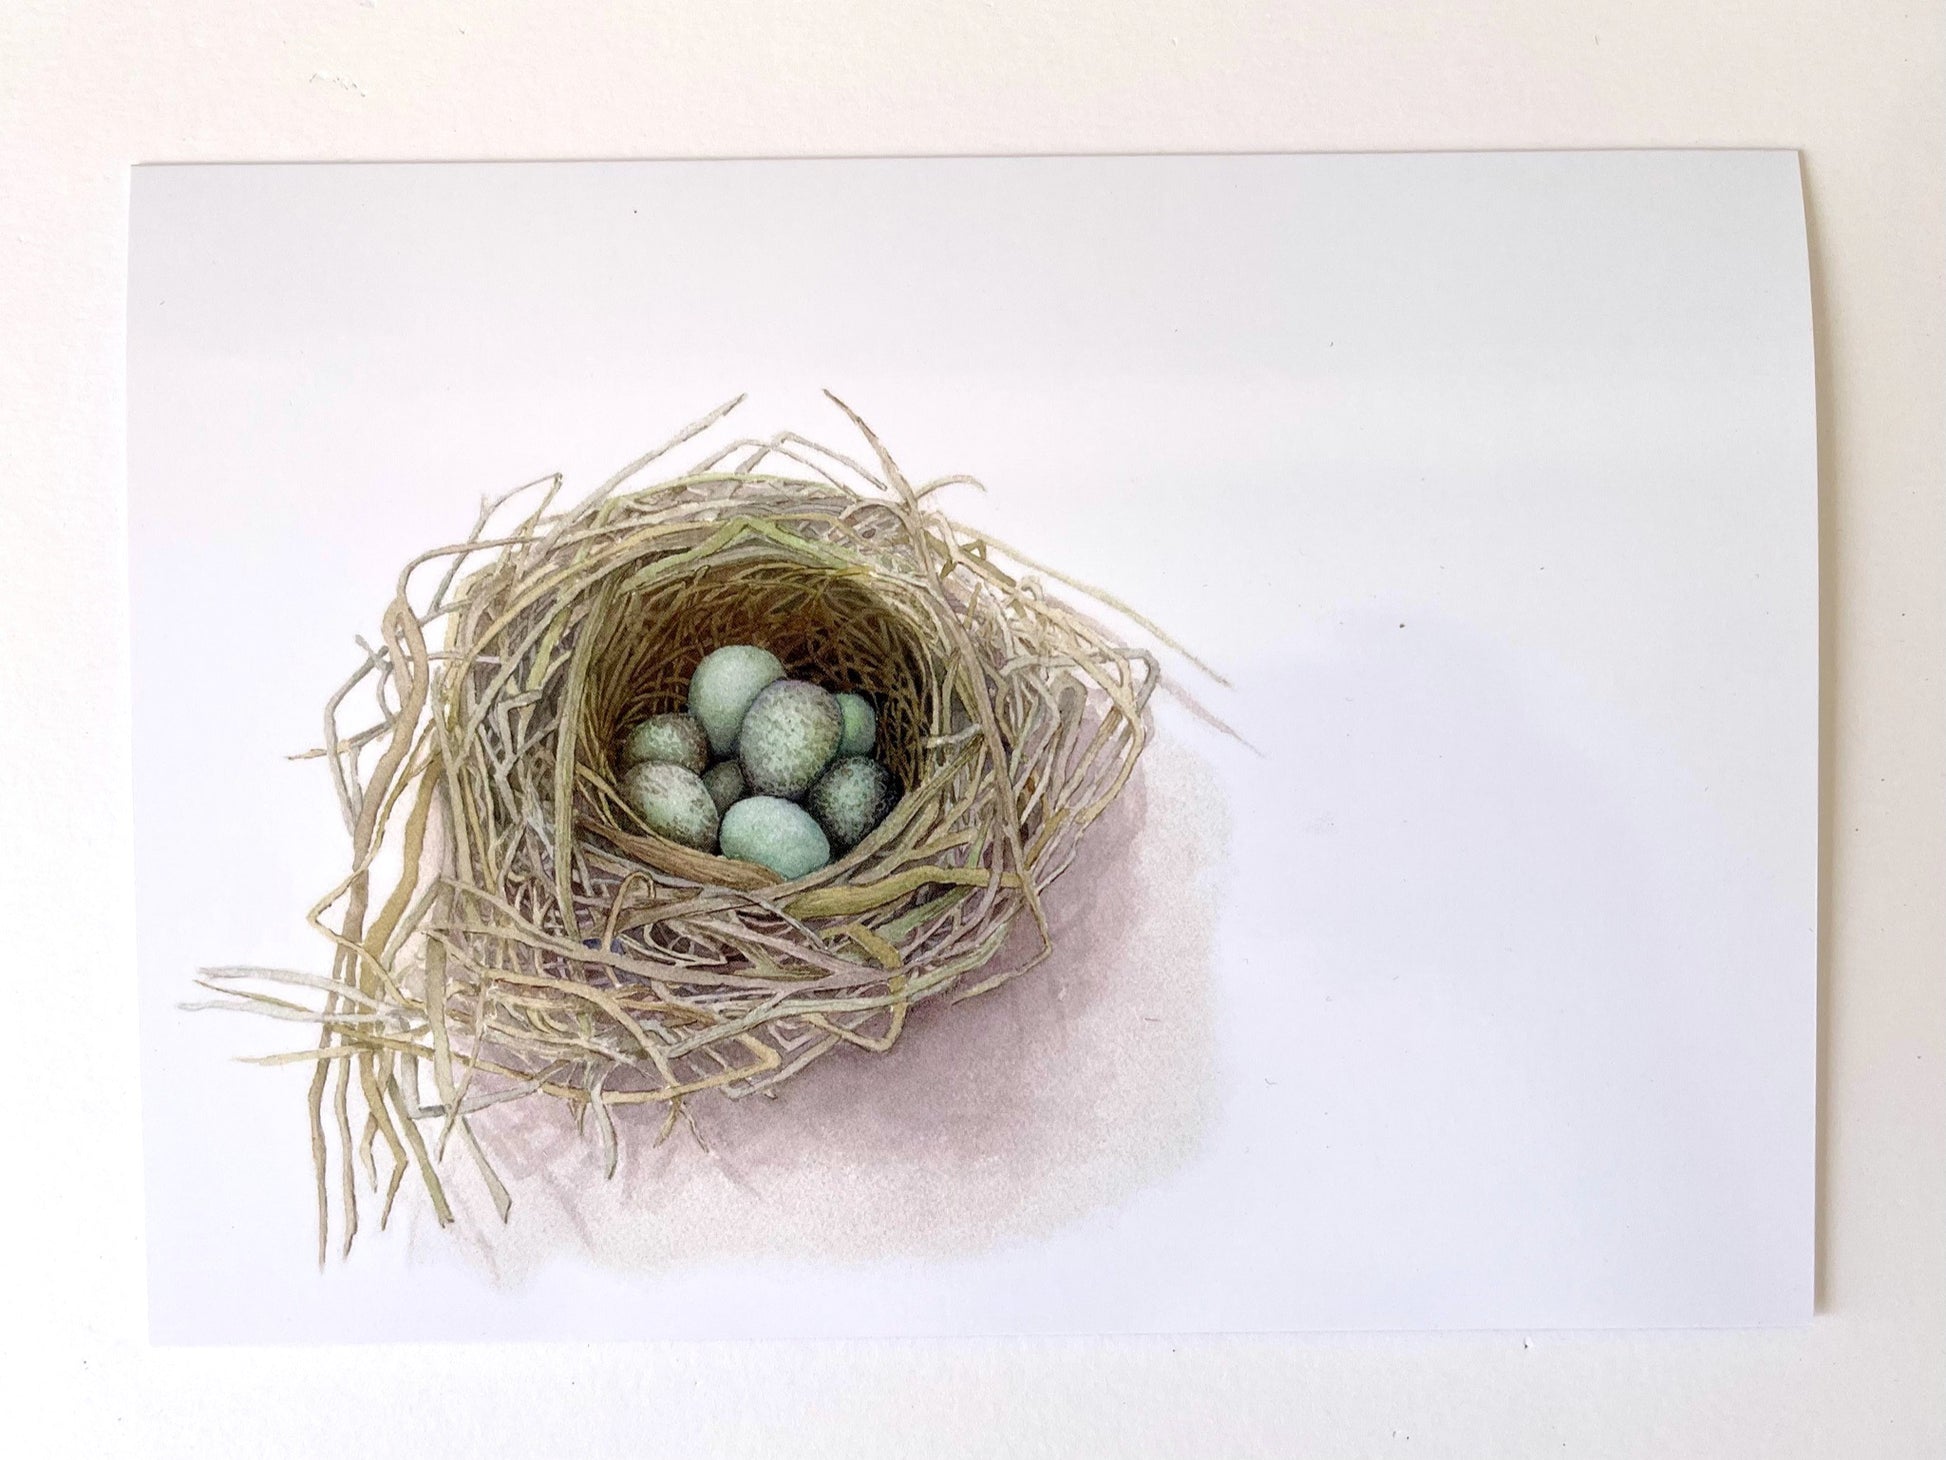 A nest holding a clutch of blue green Blackbirds eggs contrasts with the subtle taupes and beiges of the twigs surrounding them.  The nest is positioned in the bottom left hand corner of the picture against a white background.